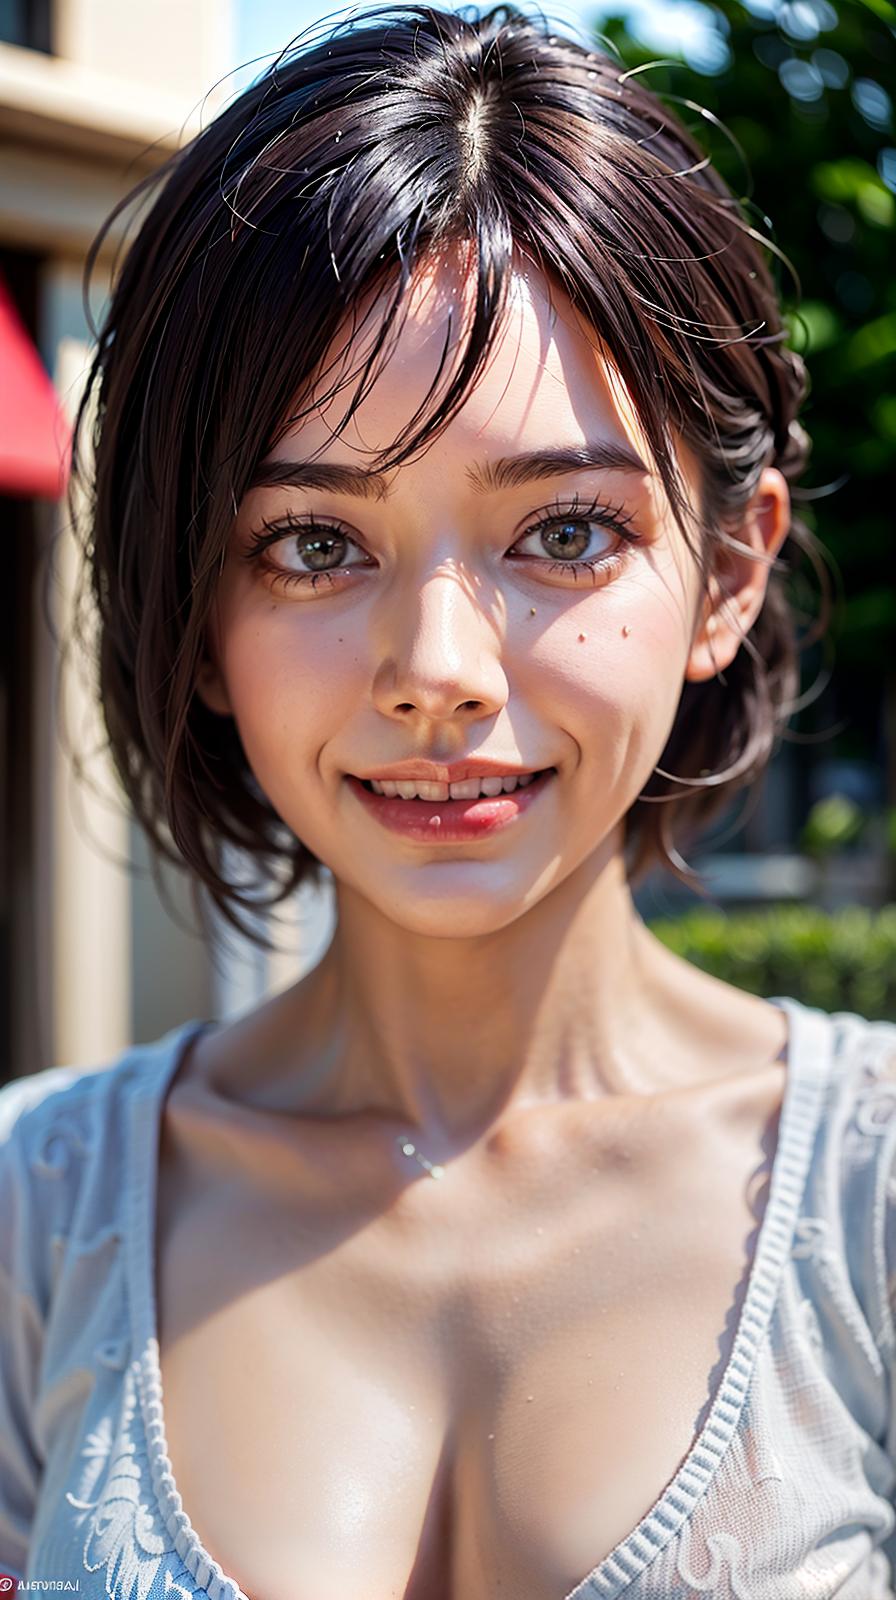  ultra high res, (photorealistic:1.4), raw photo, (realistic face), realistic eyes, (realistic skin), <lora:XXMix9_v20LoRa:0.8>, ((((masterpiece)))), best quality, very_high_resolution, ultra-detailed, in-frame,,, innocent, joyful, curious, energetic, mischievous, chubby cheeks, carefree, imaginative, innocent smile, pure-hearted, full of life, youthful, innocent eyes, cute, mischief-maker, full of wonder, spirited, childlike